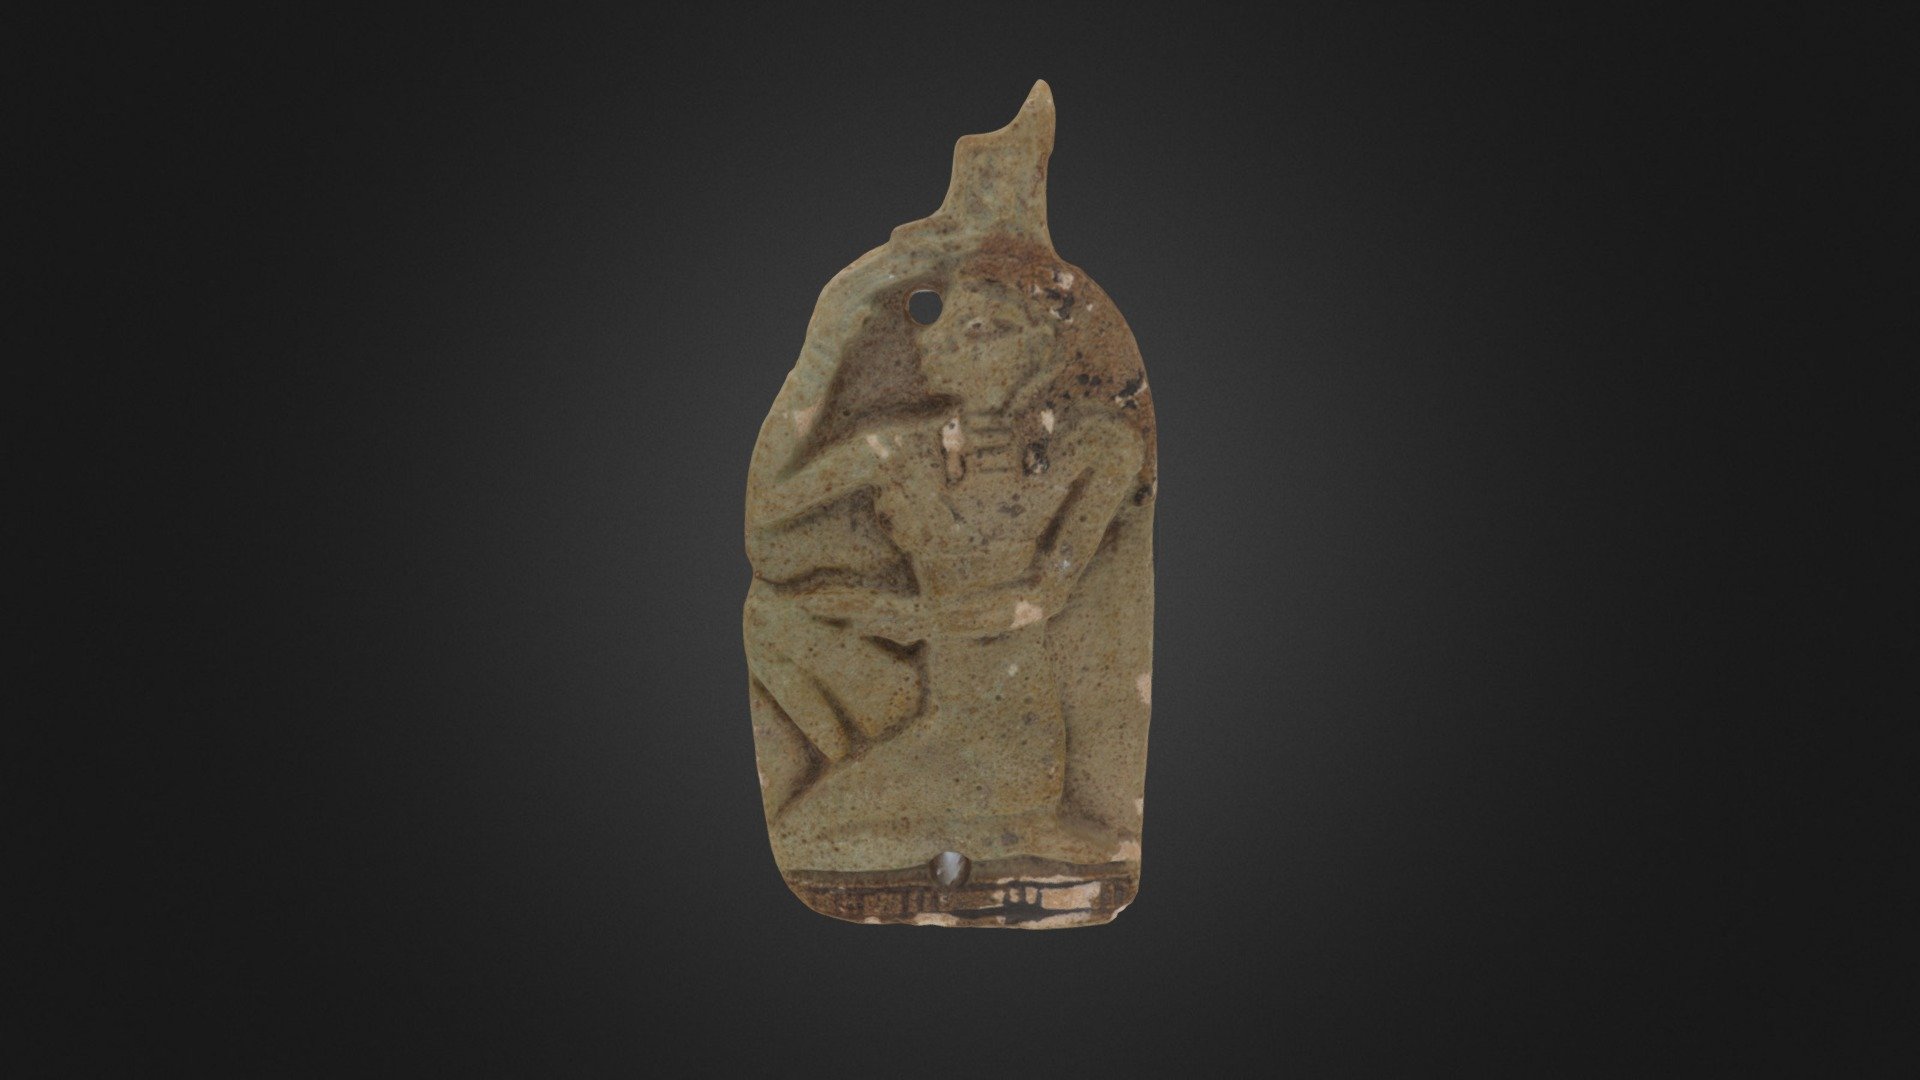 Number: RAFFMA, EG.01.009.2001 - Faience Amulet of Isis (RAFFMA Artifact) - 3D model by raffmacsusb 3d model